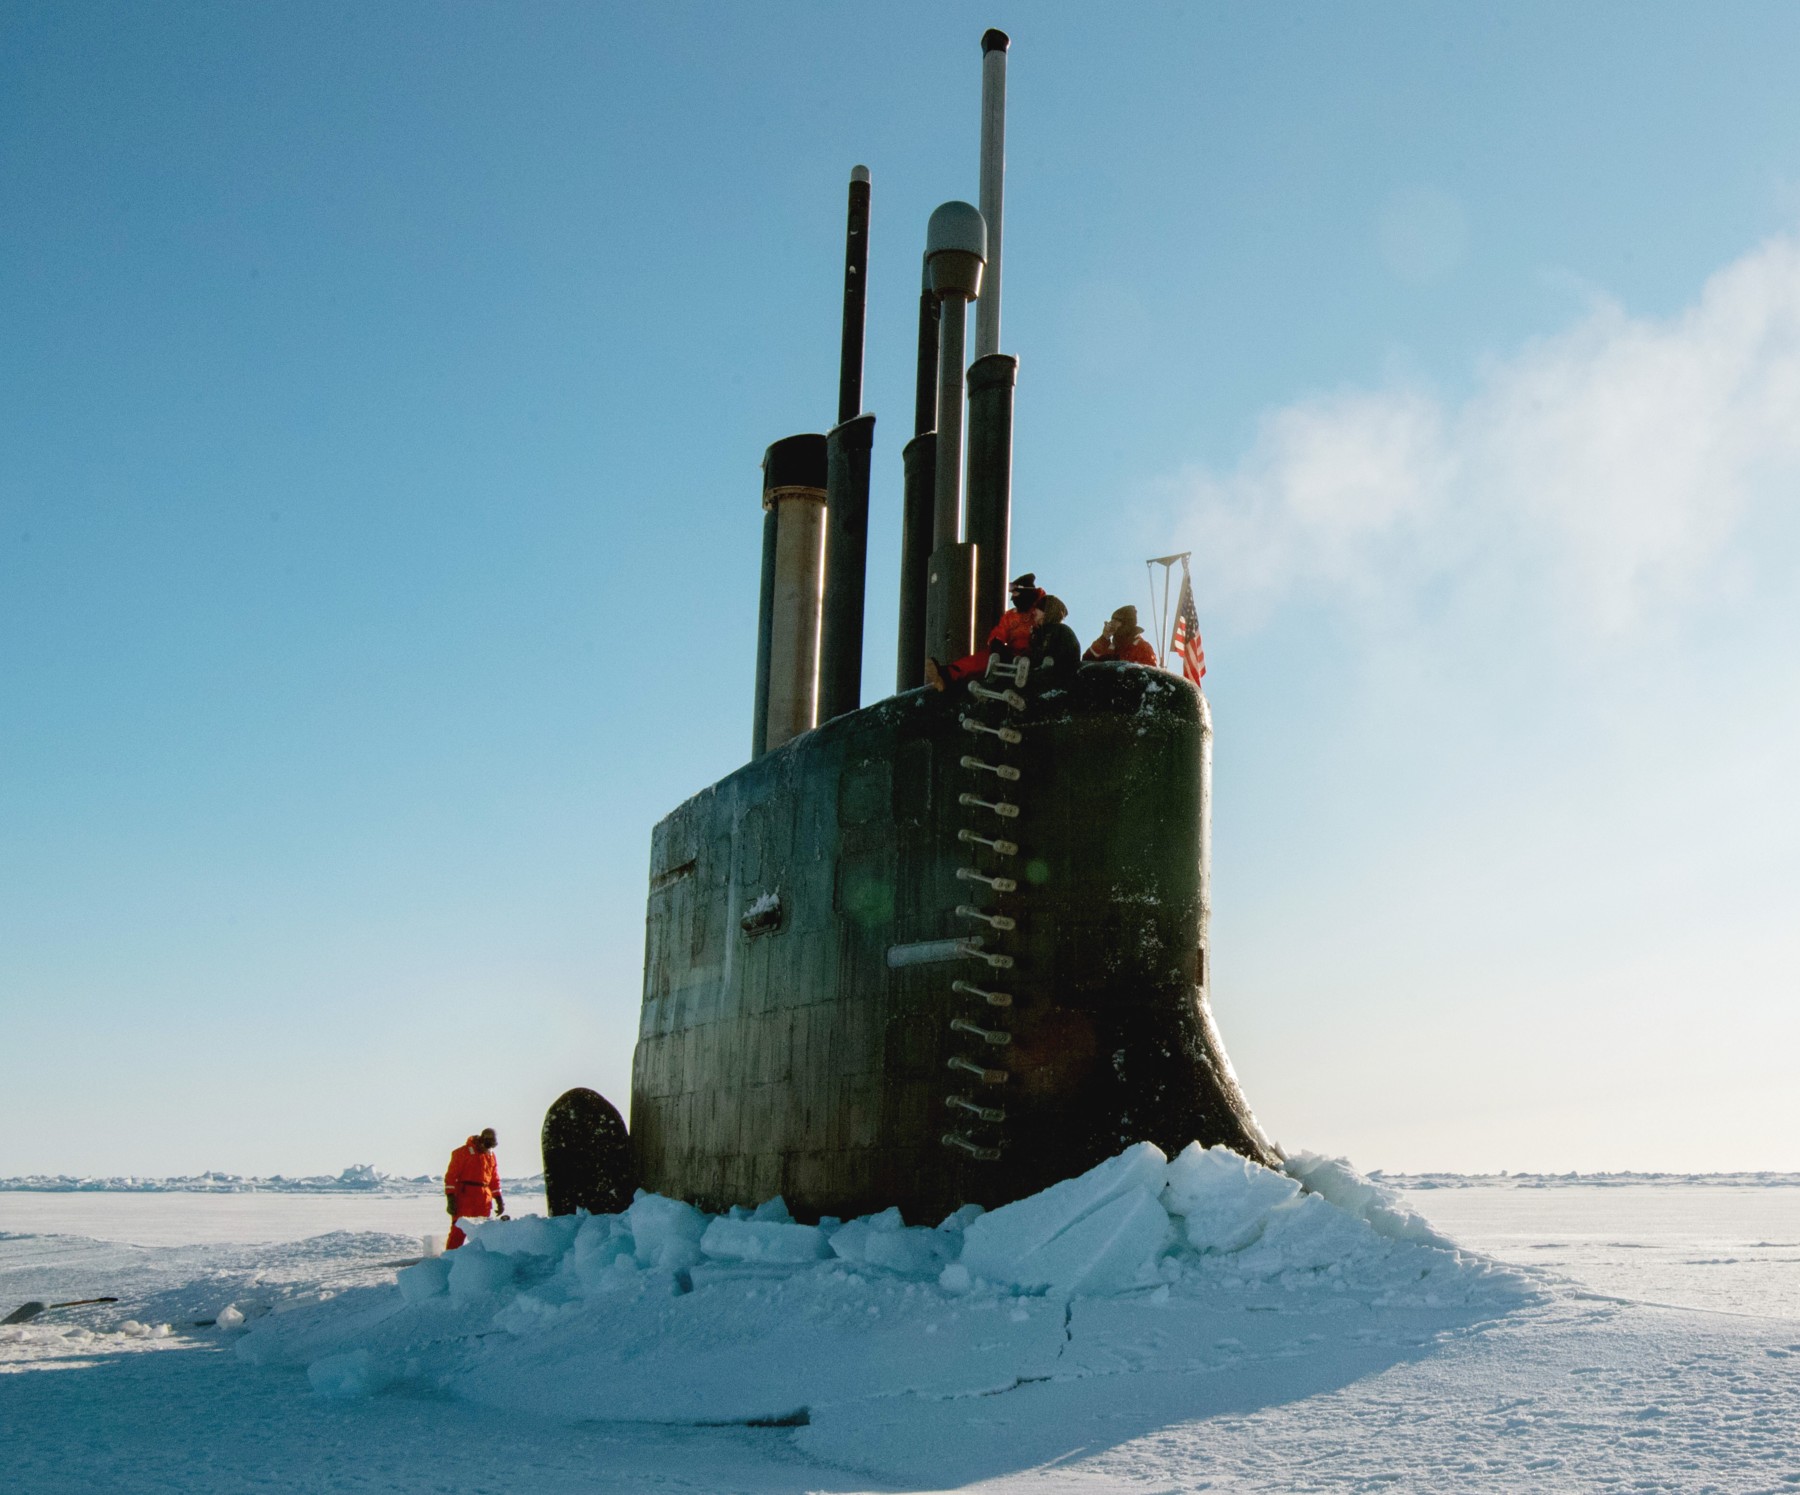 ssn-22 uss connecticut seawolf class attack submarine us navy exercise icex 18 arctic ocean 38